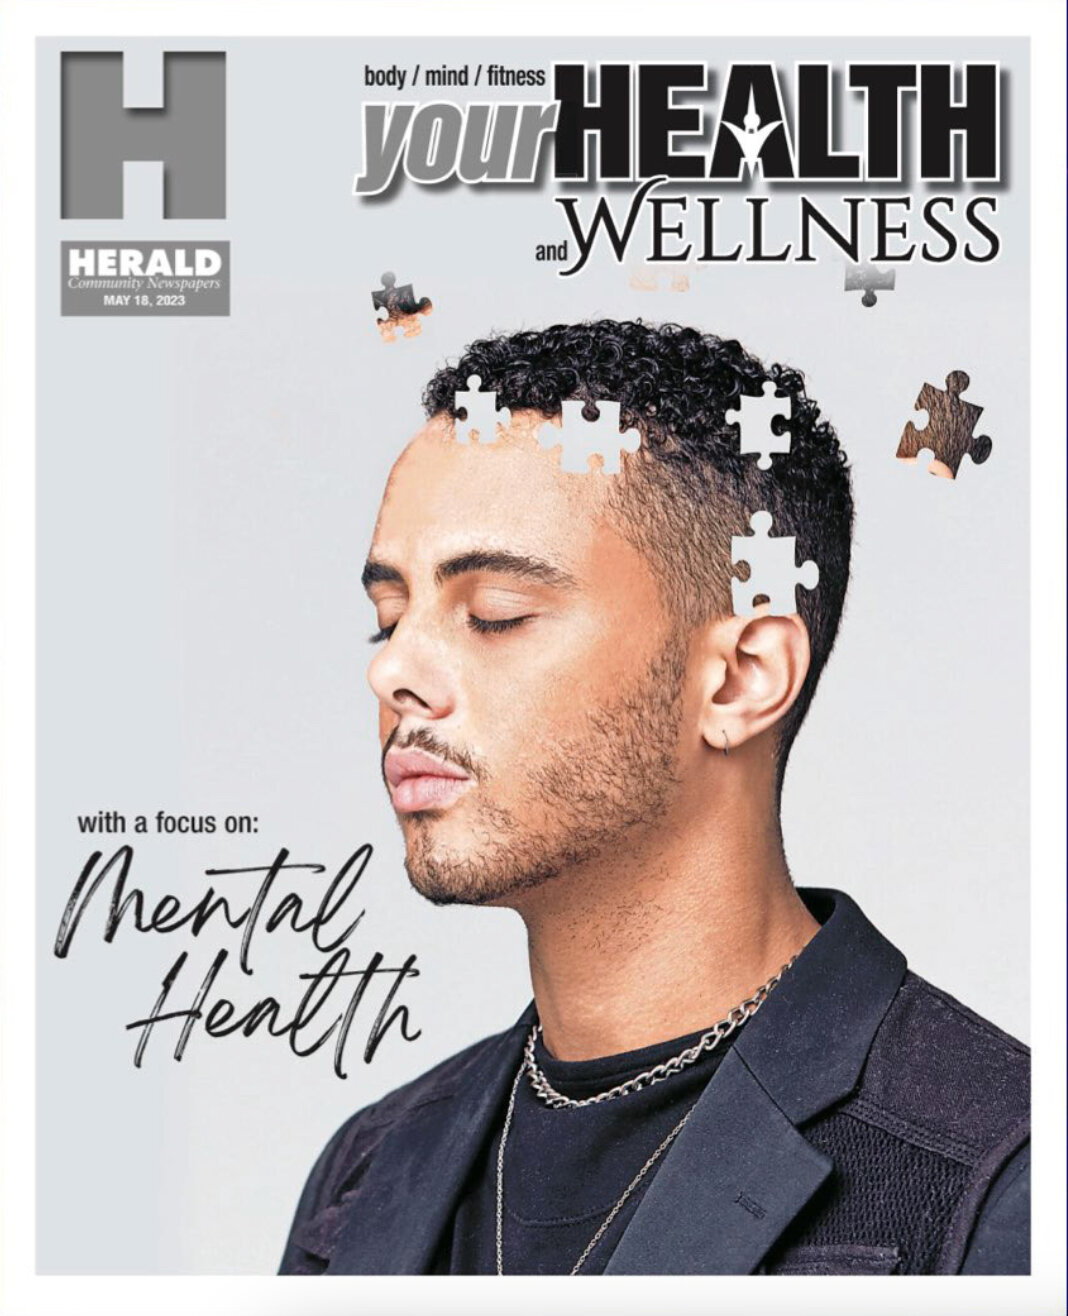 Herald Community Newspapers creative director Jeffrey Negrin won first place for best special section cover design for his cover last May focusing on mental health for a Your Health and Wellness special section.